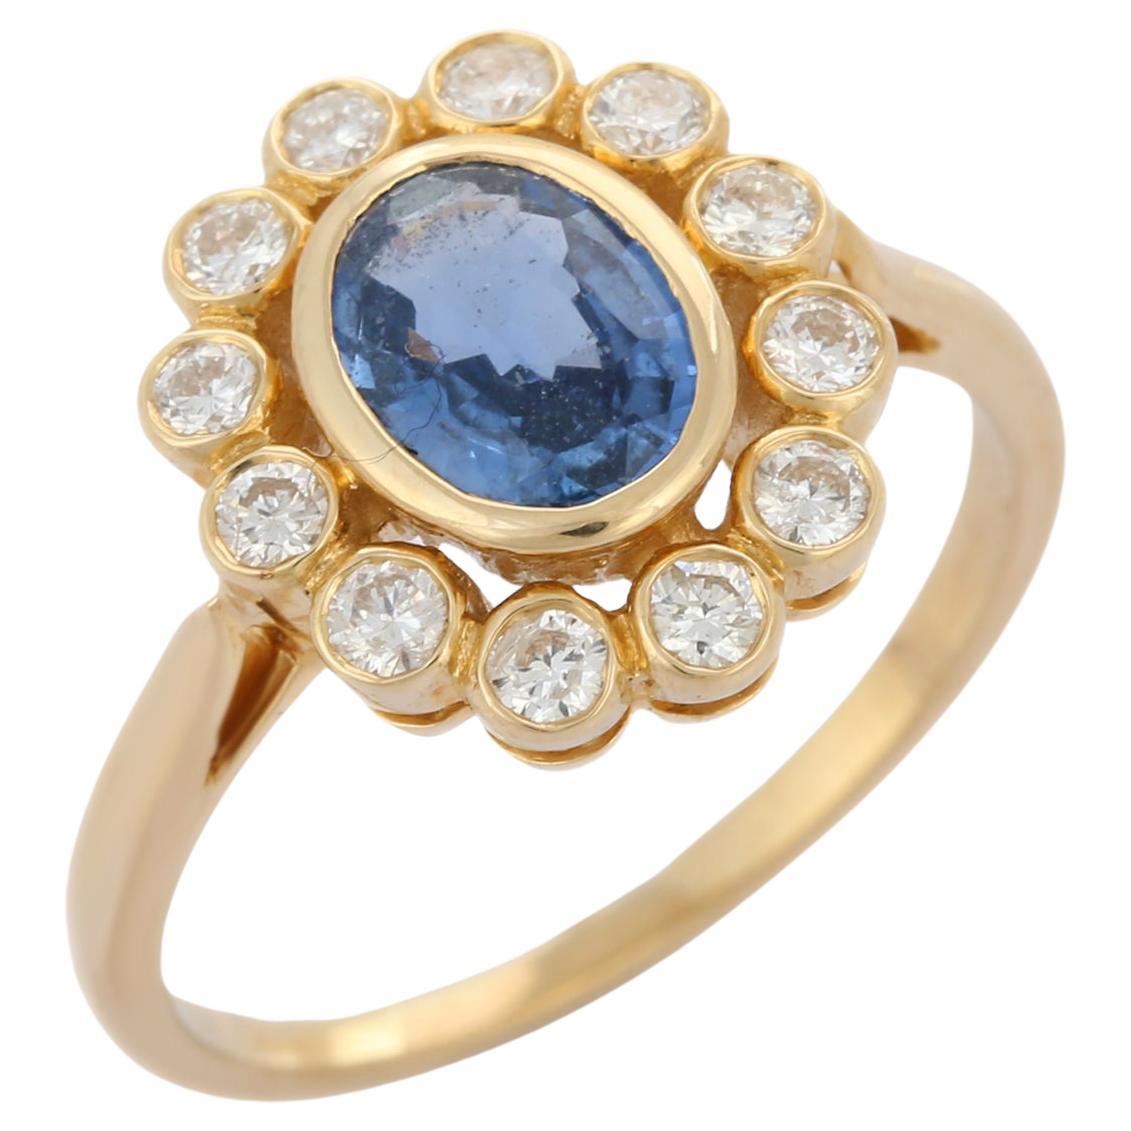 For Sale:  Contemporary 1.25 ct Sapphire Diamond Halo Ring in 14K Solid Yellow Gold